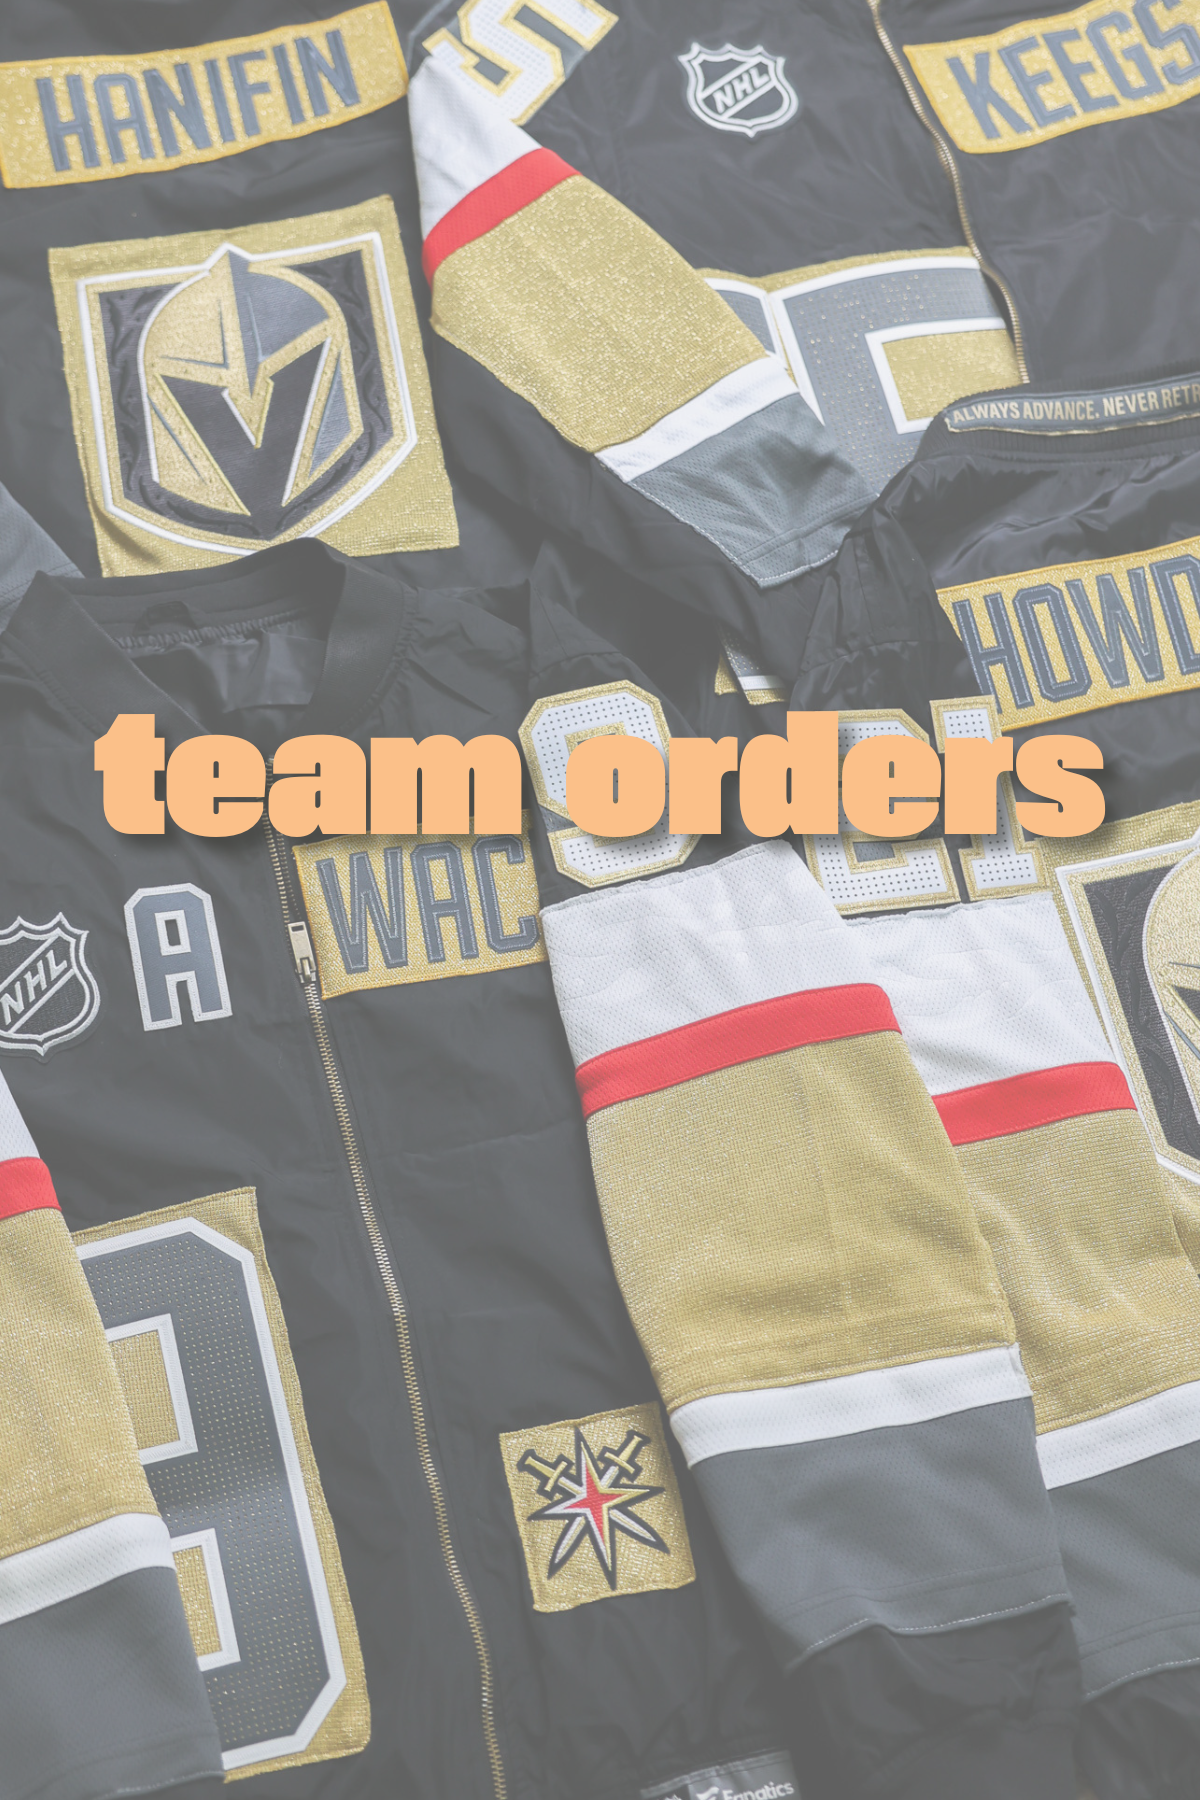 Team Order Inquiry and Mock Up Form